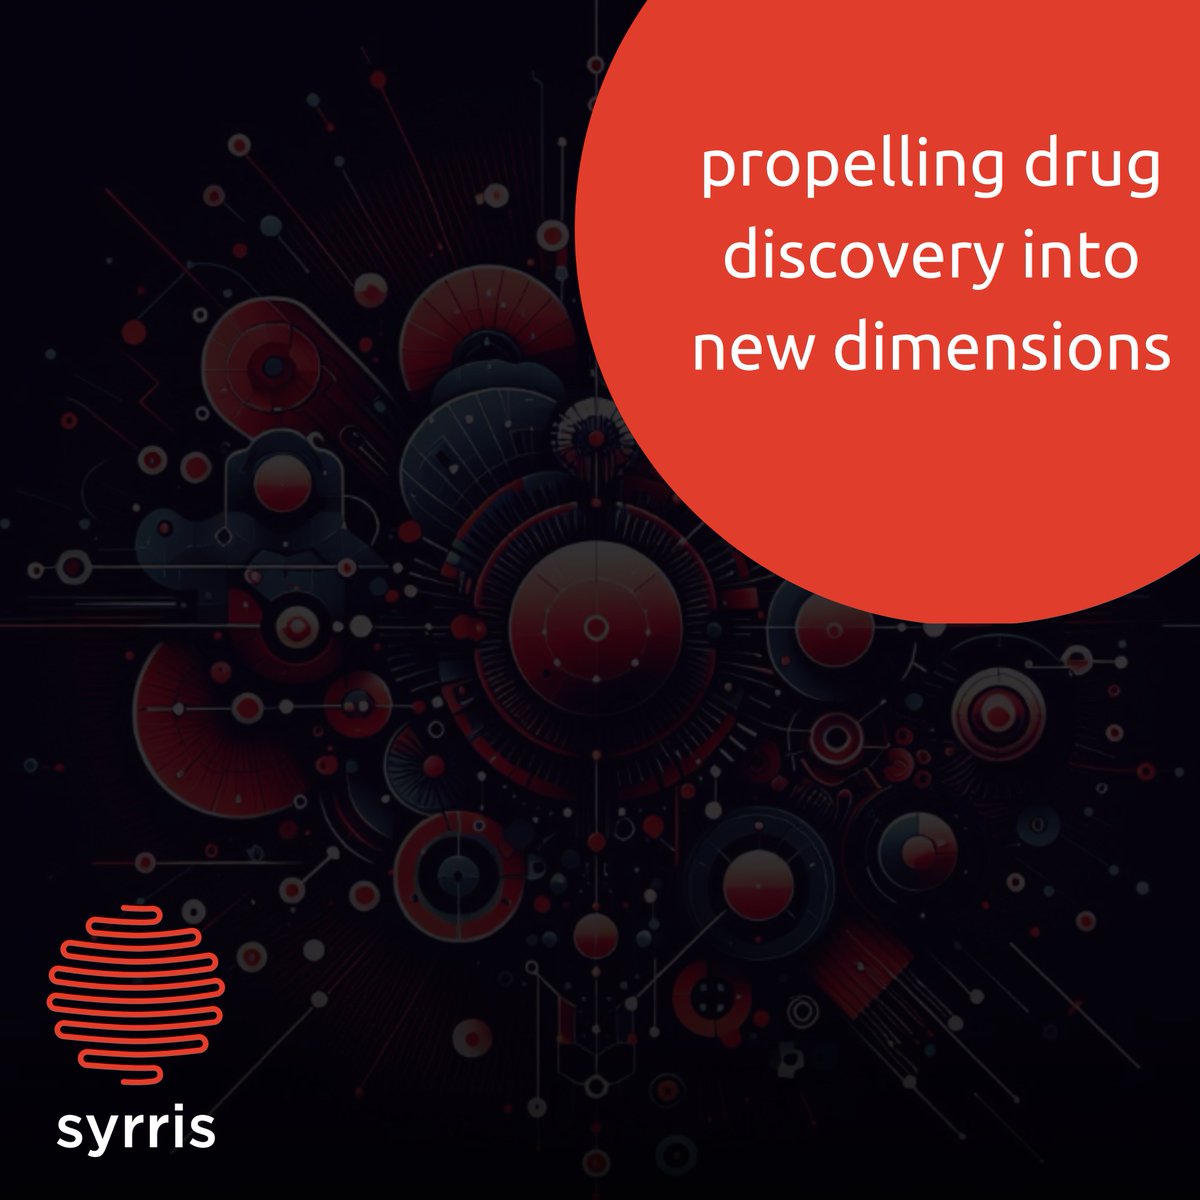 Our #FlowChemistry instrumentation takes center stage in #DrugDiscovery laboratories, adding unparalleled value to the early phases of #DrugDevelopment.

Explore the transformative power of our platforms, designed to unlock new #ChemicalSpace: ow.ly/QE5H50QFz33